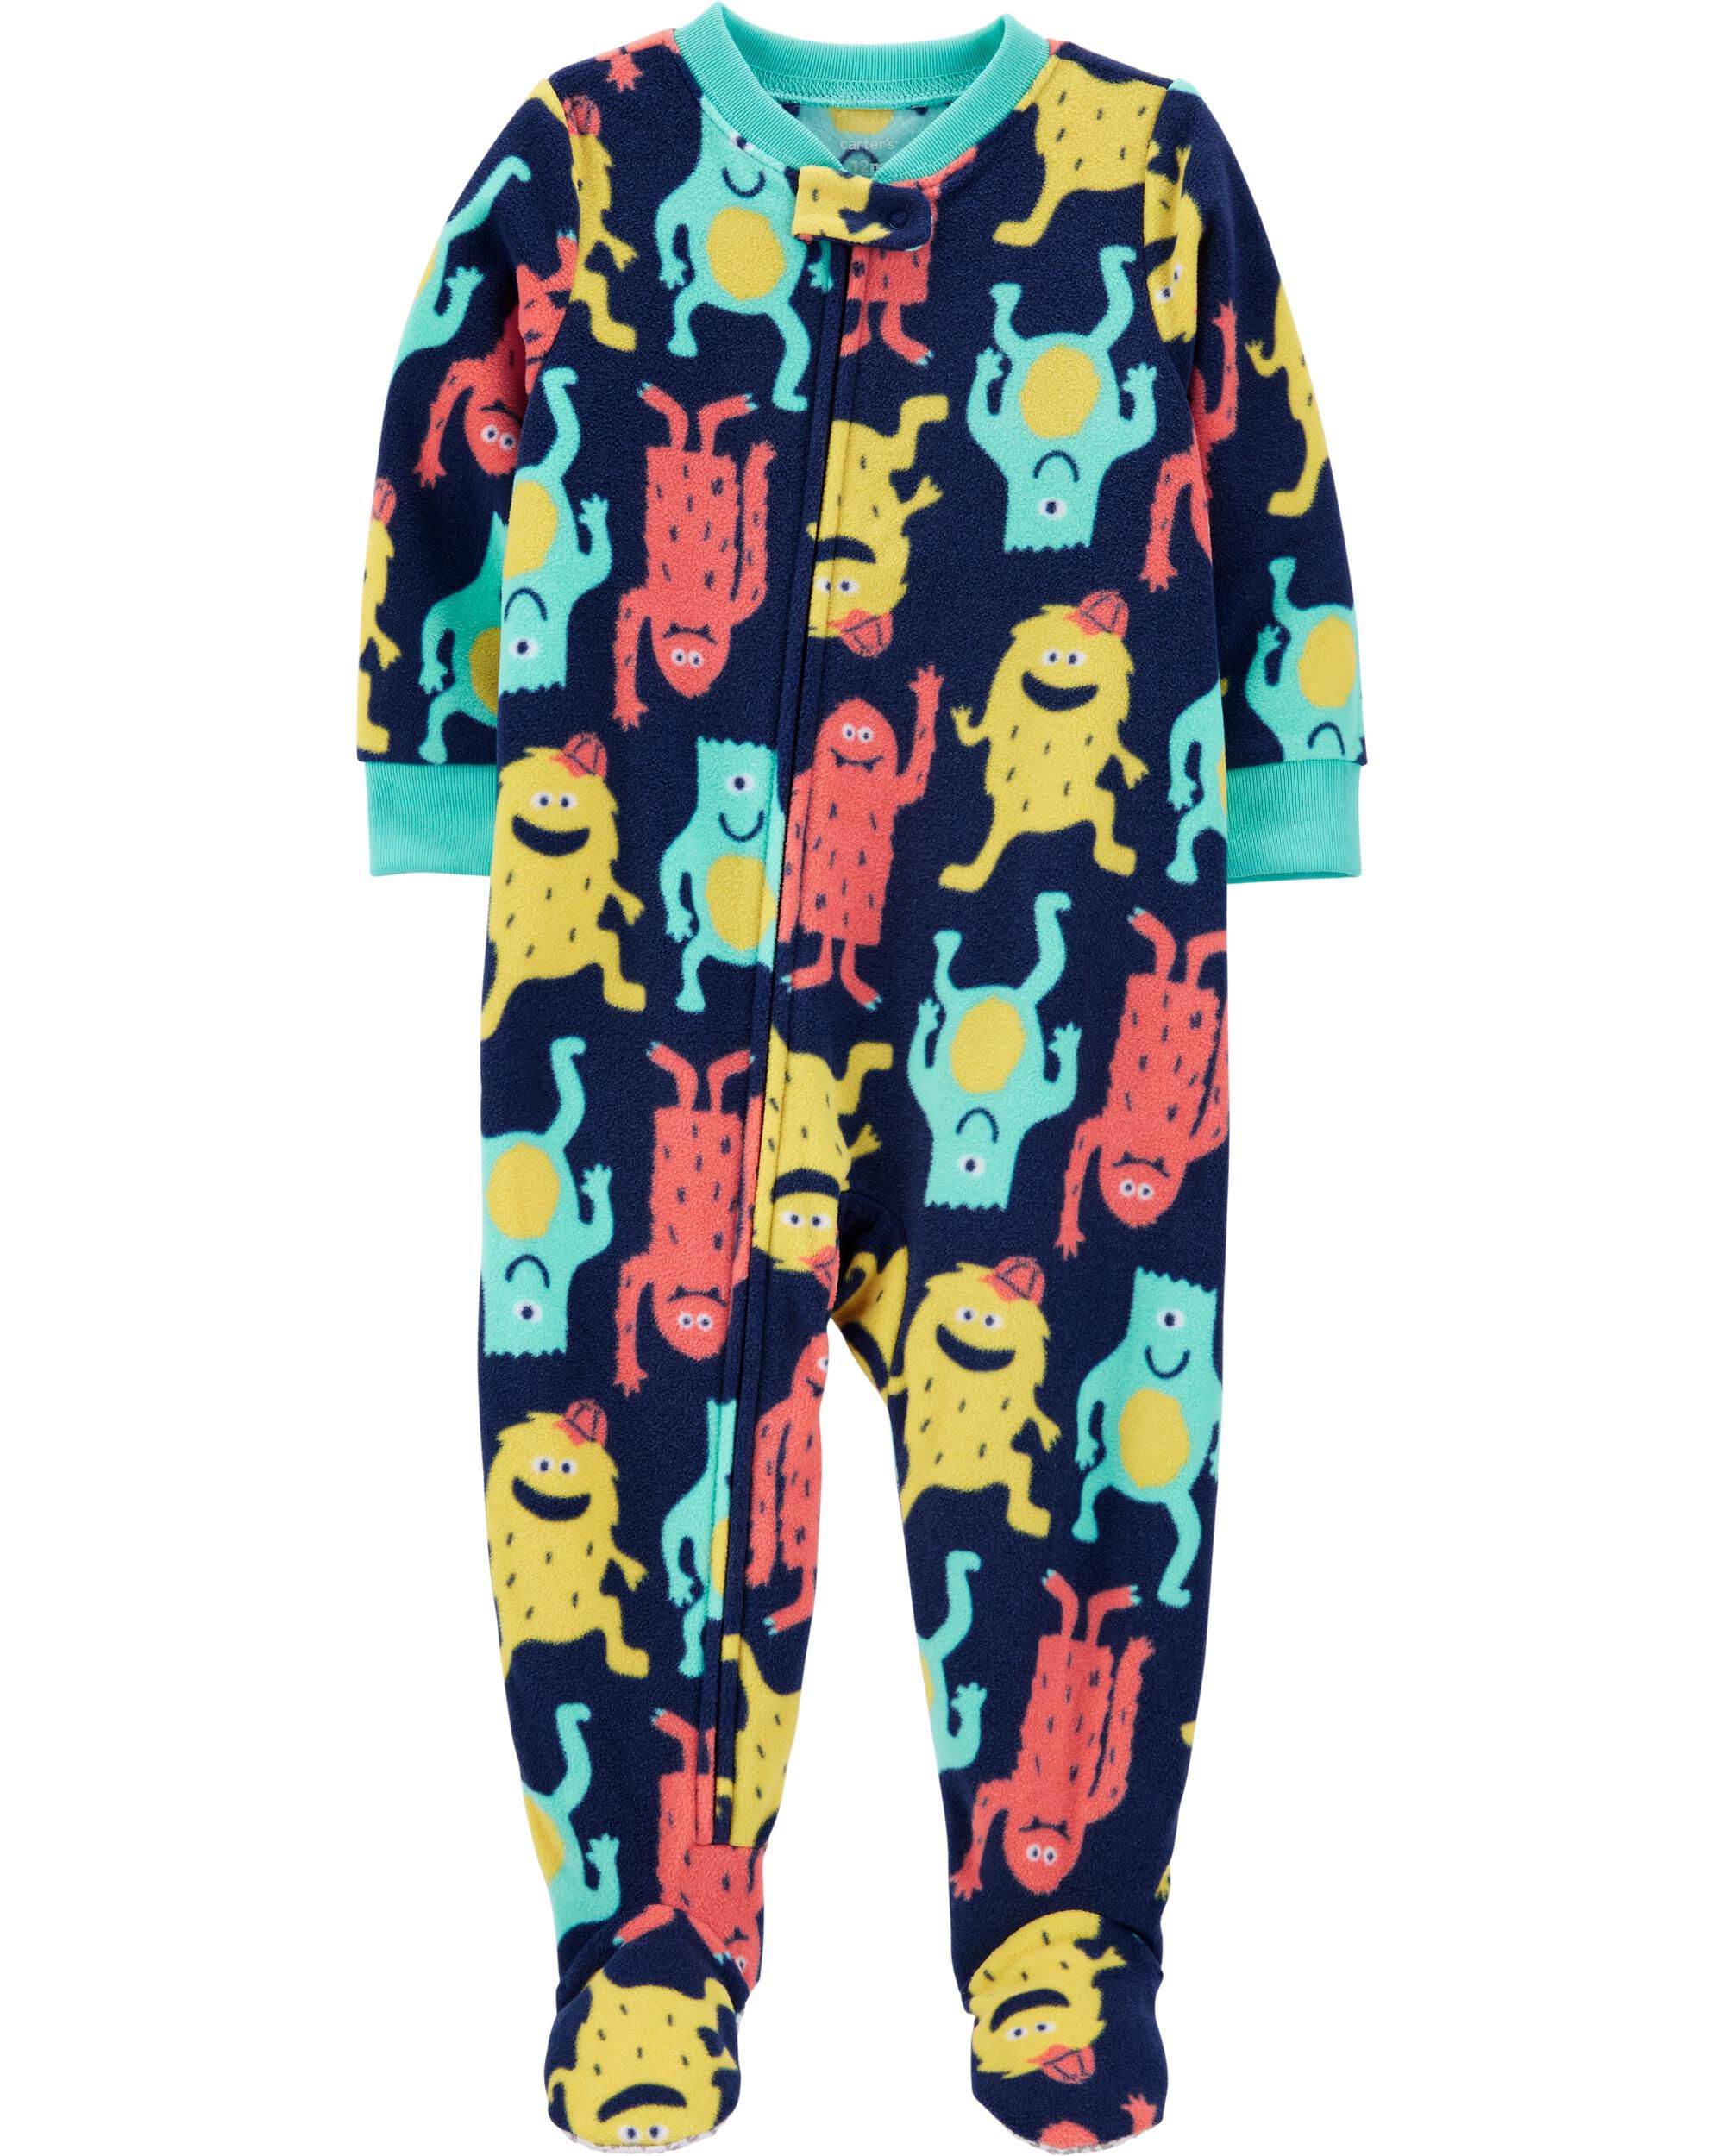 carter's 12 month footed pajamas